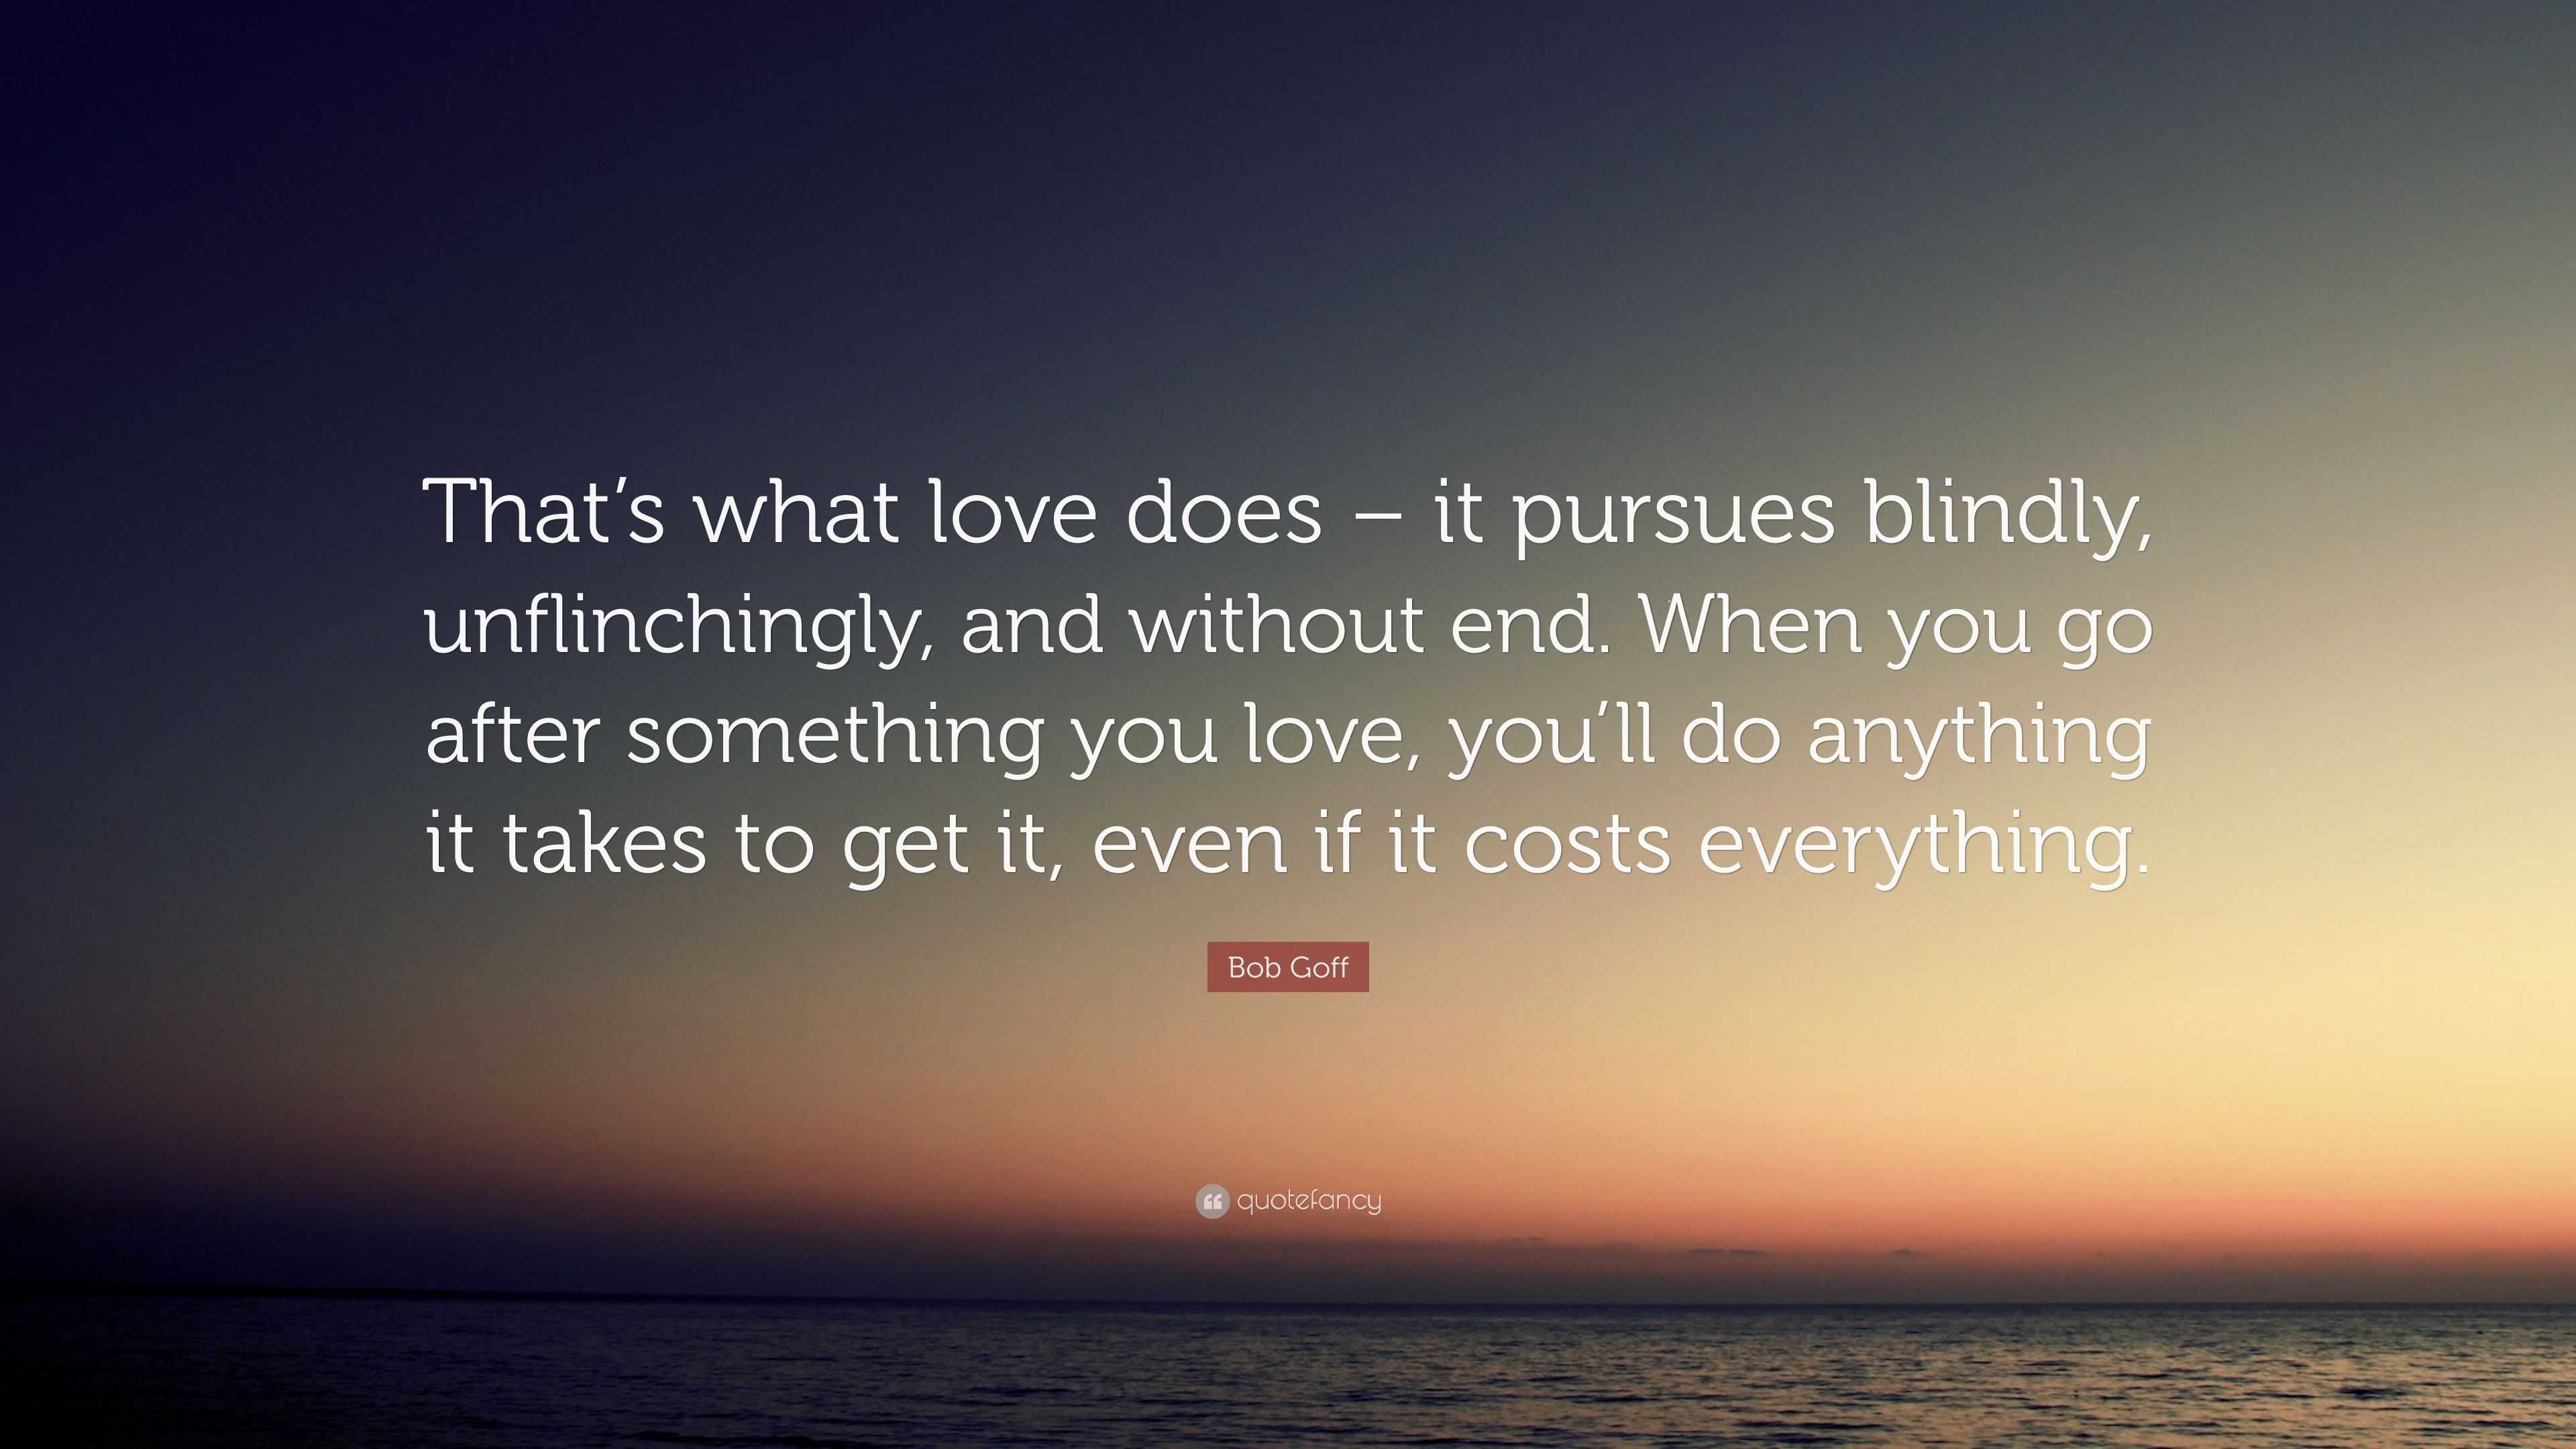 Bob Goff Quote: “That’s what love does – it pursues blindly ...